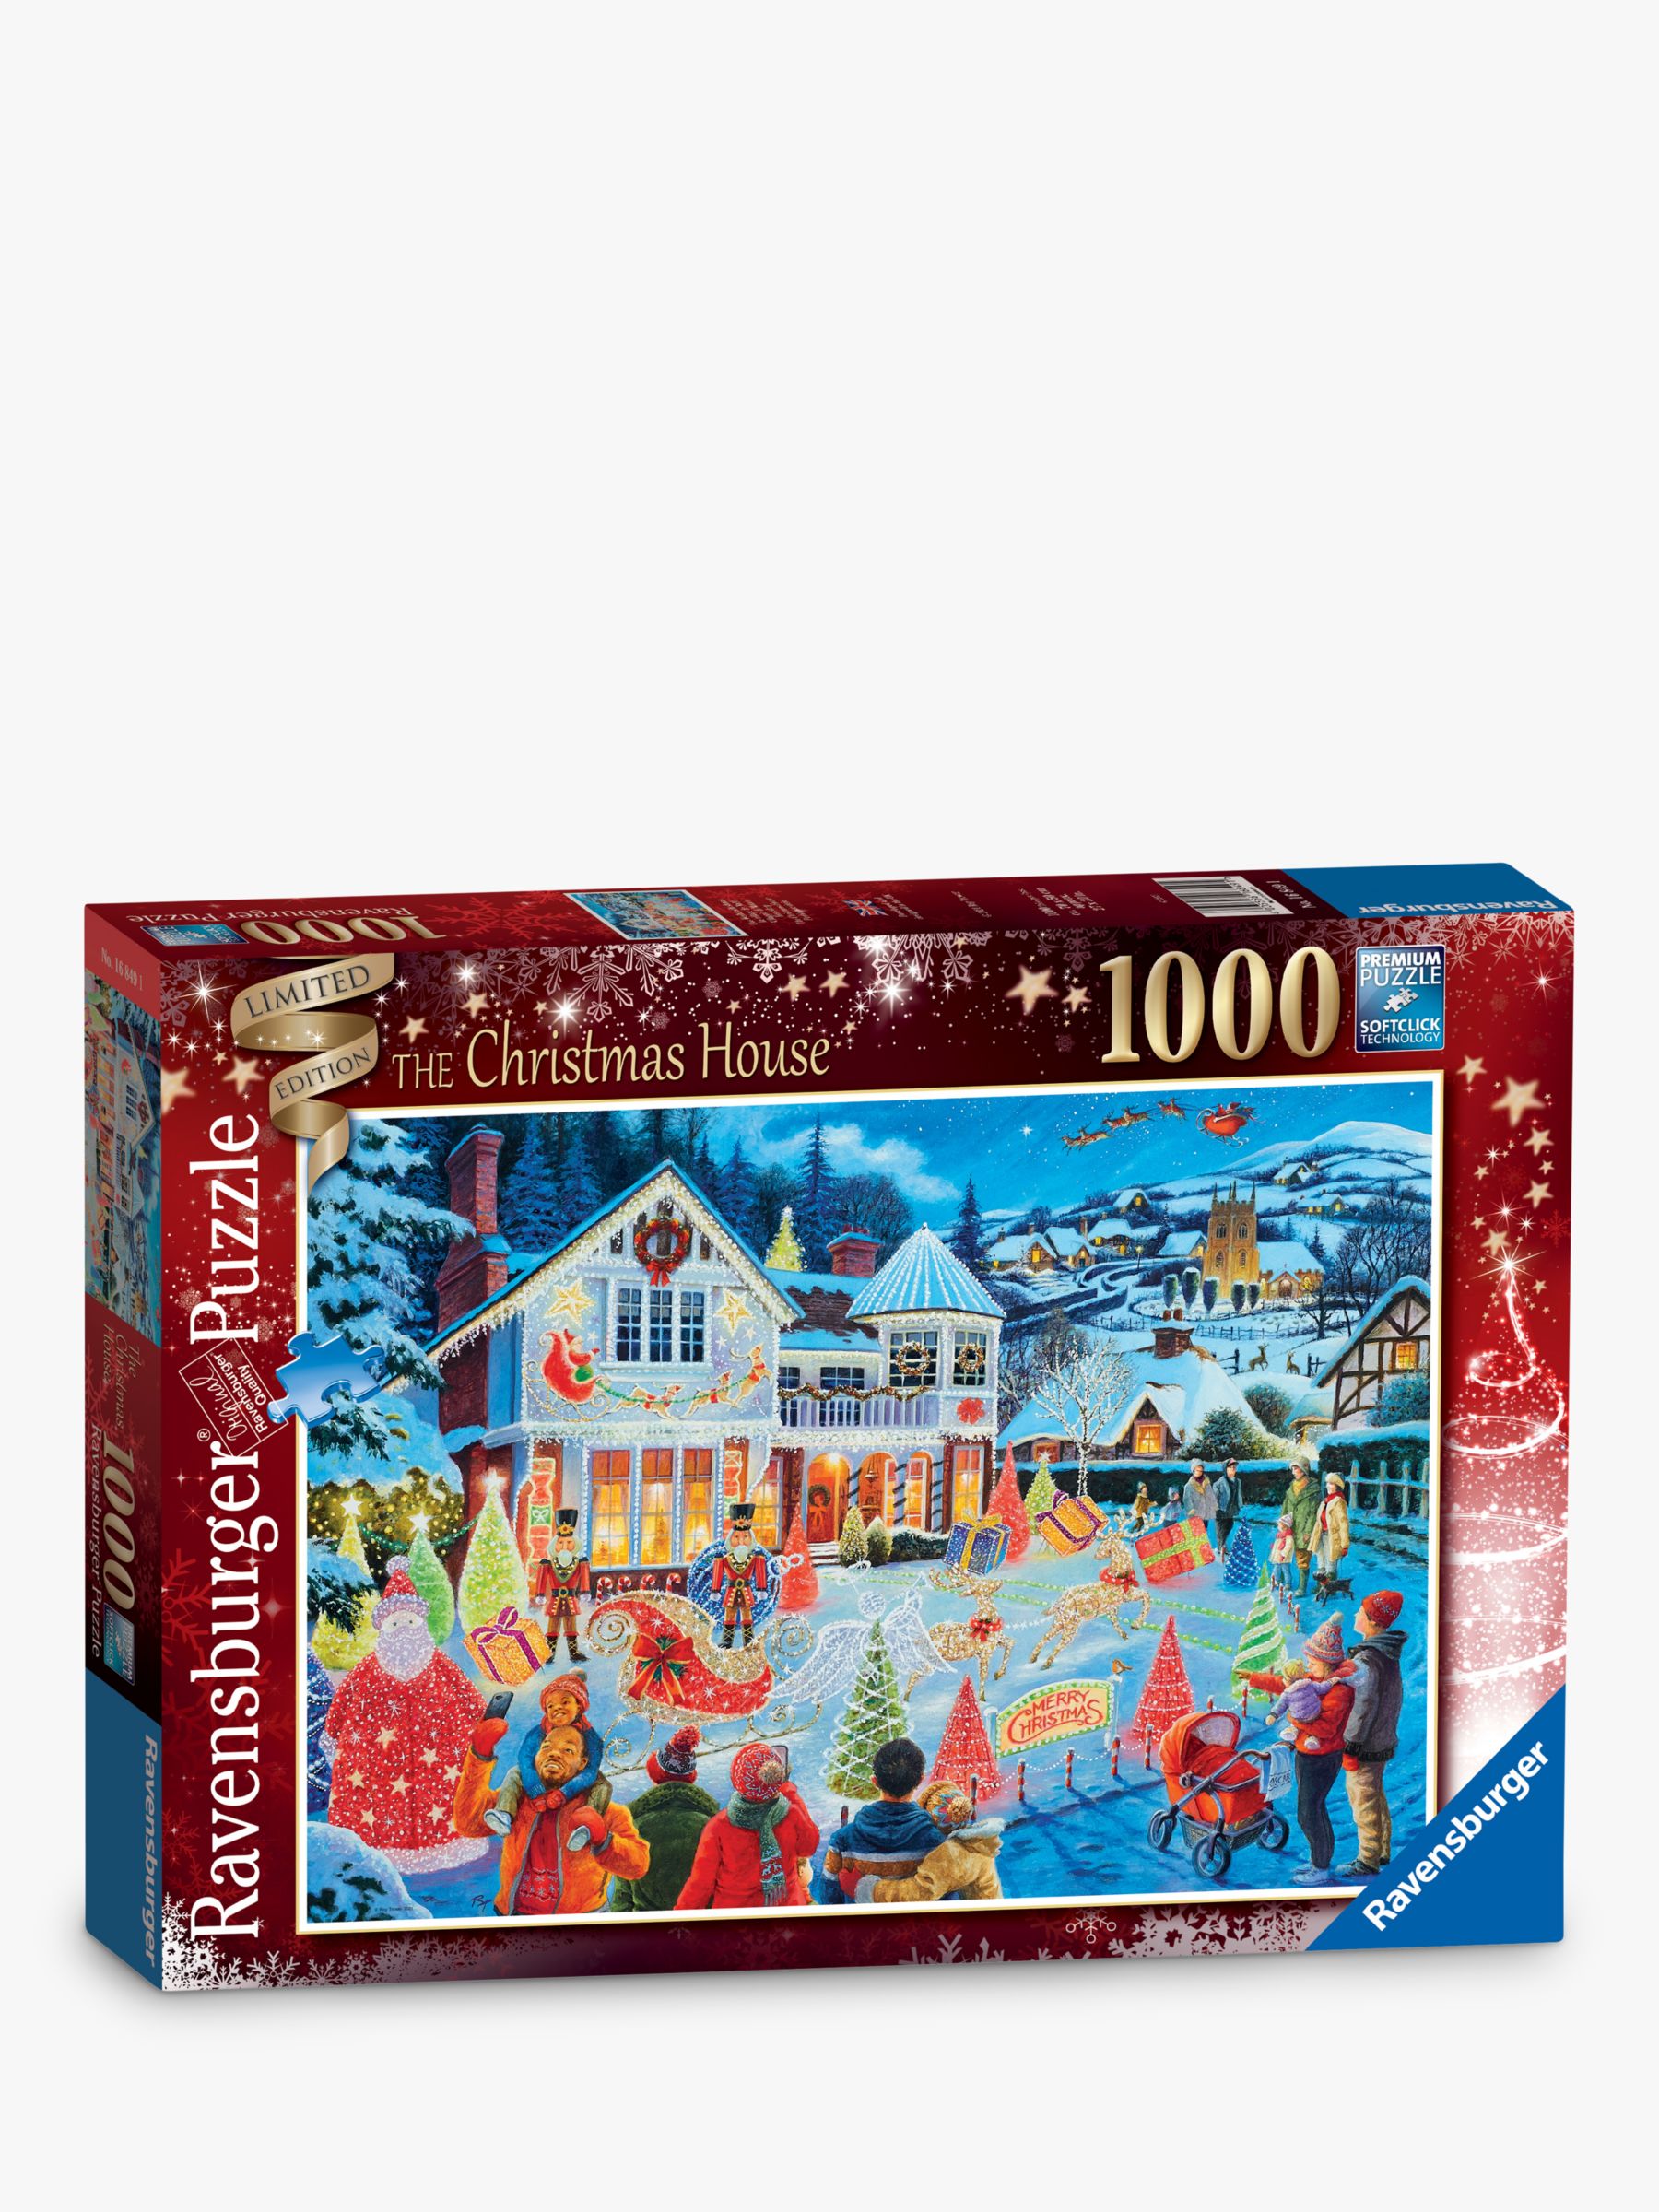 Ravensburger The Christmas House Jigsaw Puzzle 1000 Pieces